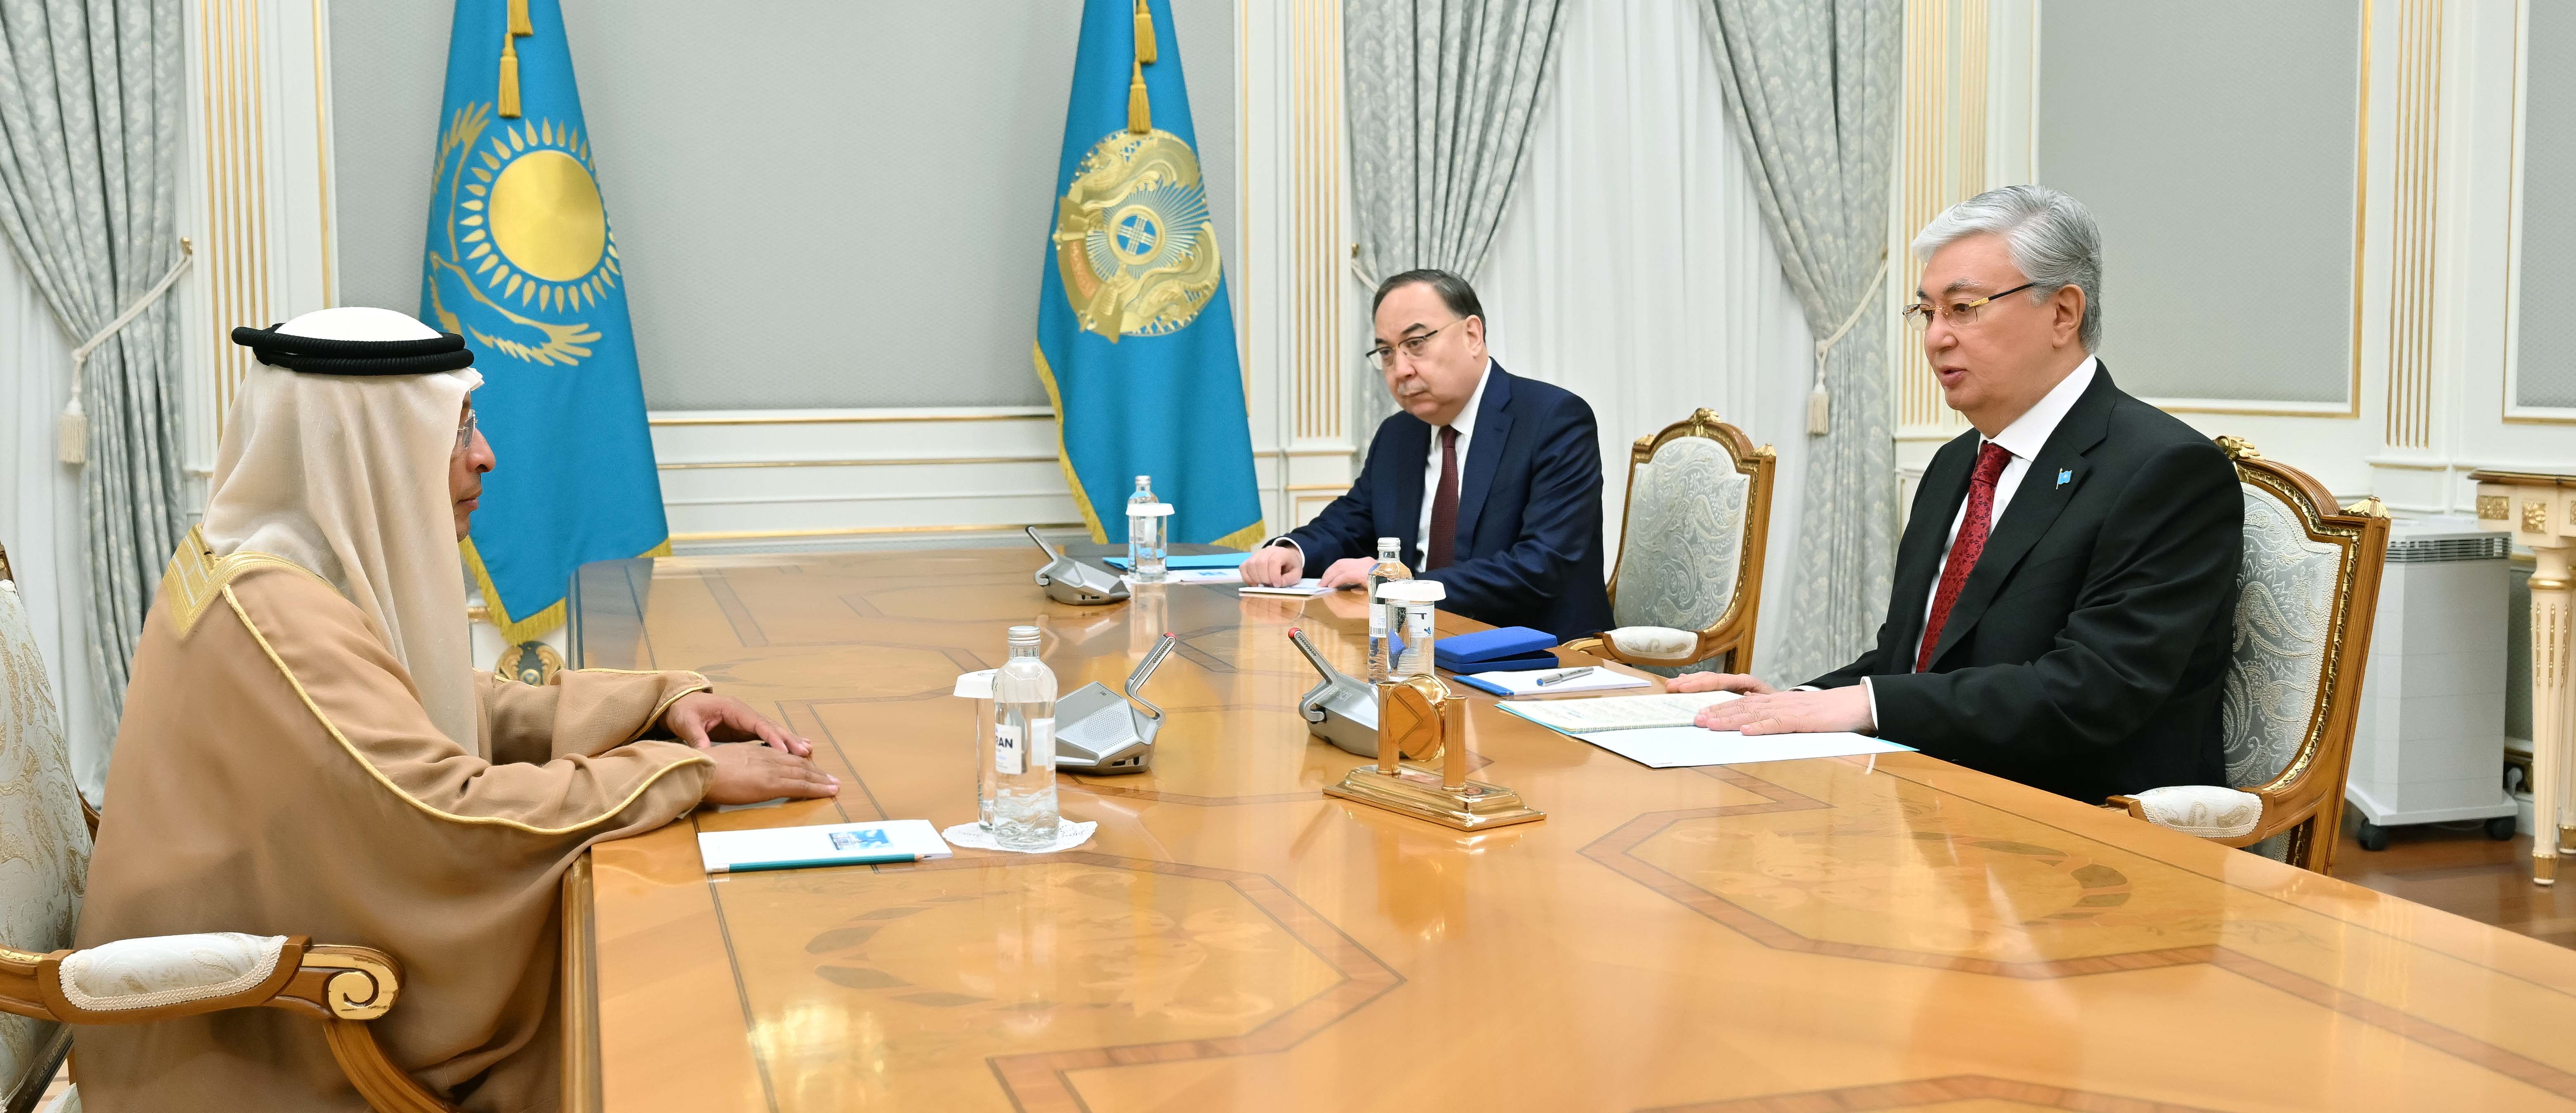 Joint Declaration on Strategic Investment Projects takes center stage in Kazakhstan-UAE talks